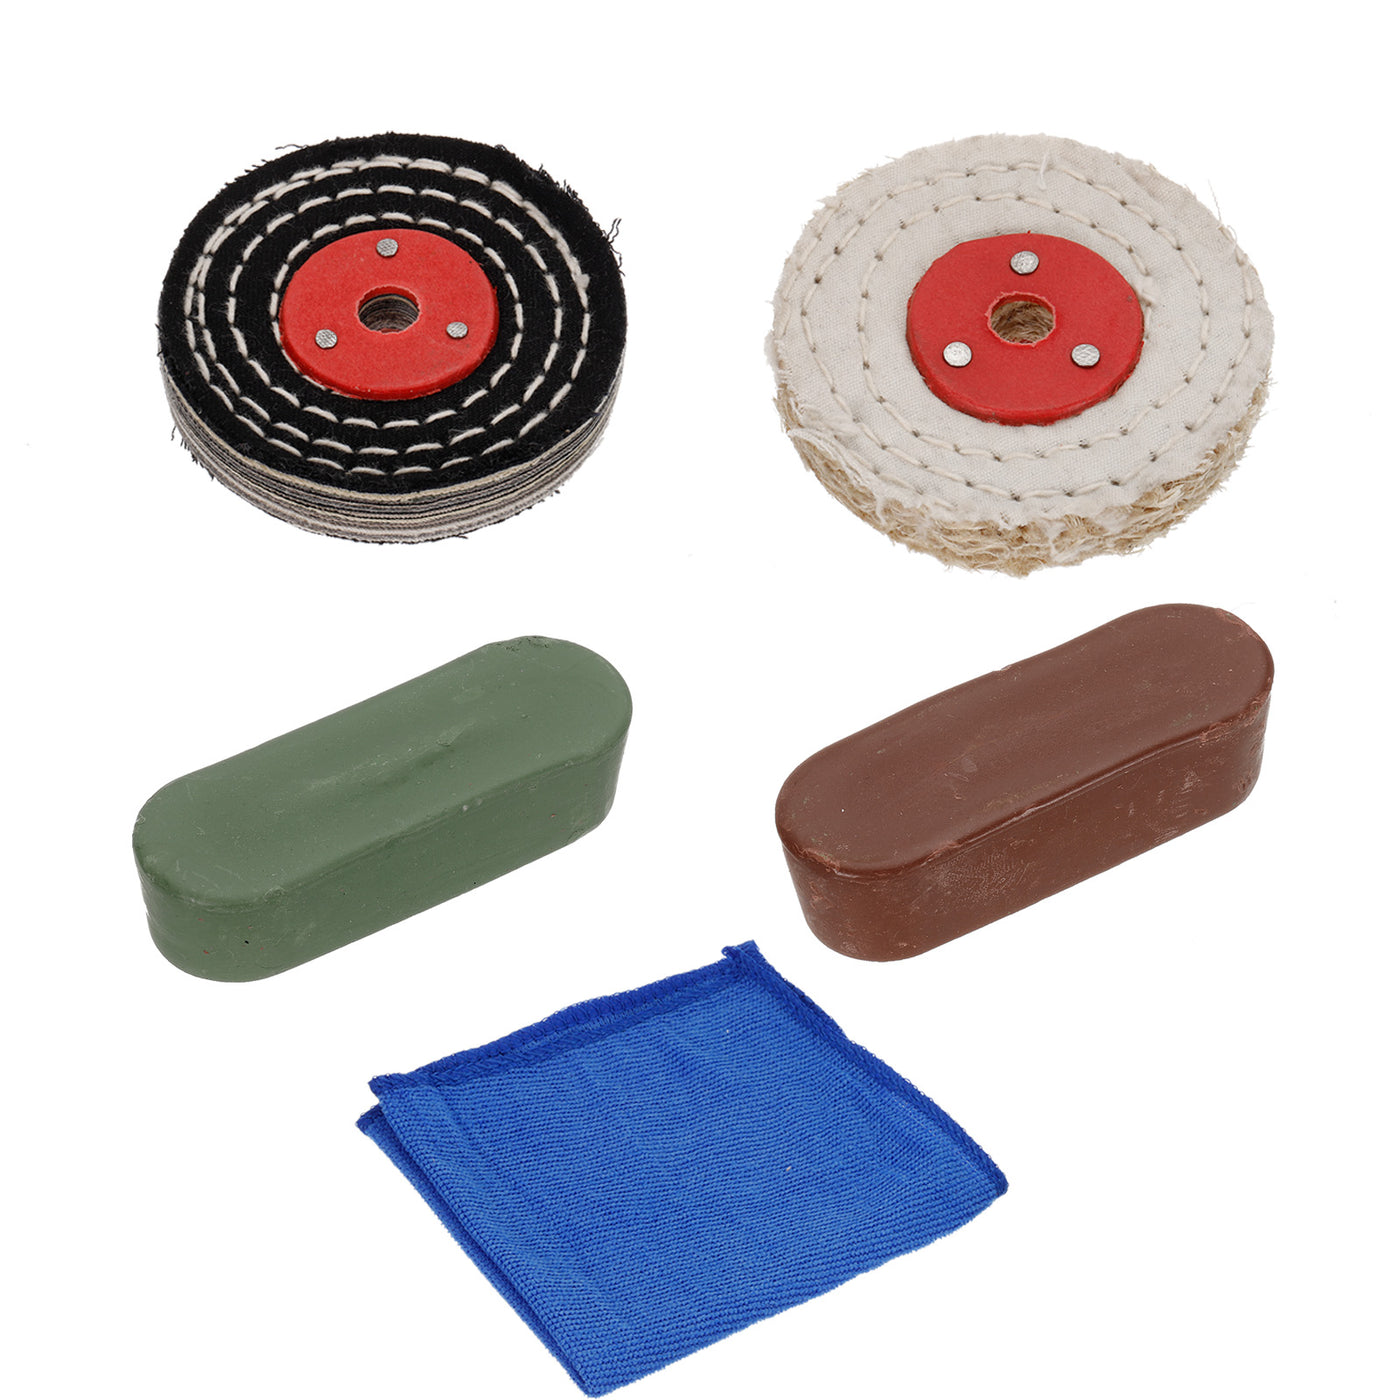 uxcell Uxcell Buffing Wheel & Polish Pad Set, Cone/Cylindrica/Mushroom Shape Cotton Polished Wheels with Microfiber Towel, Polishing Compounds